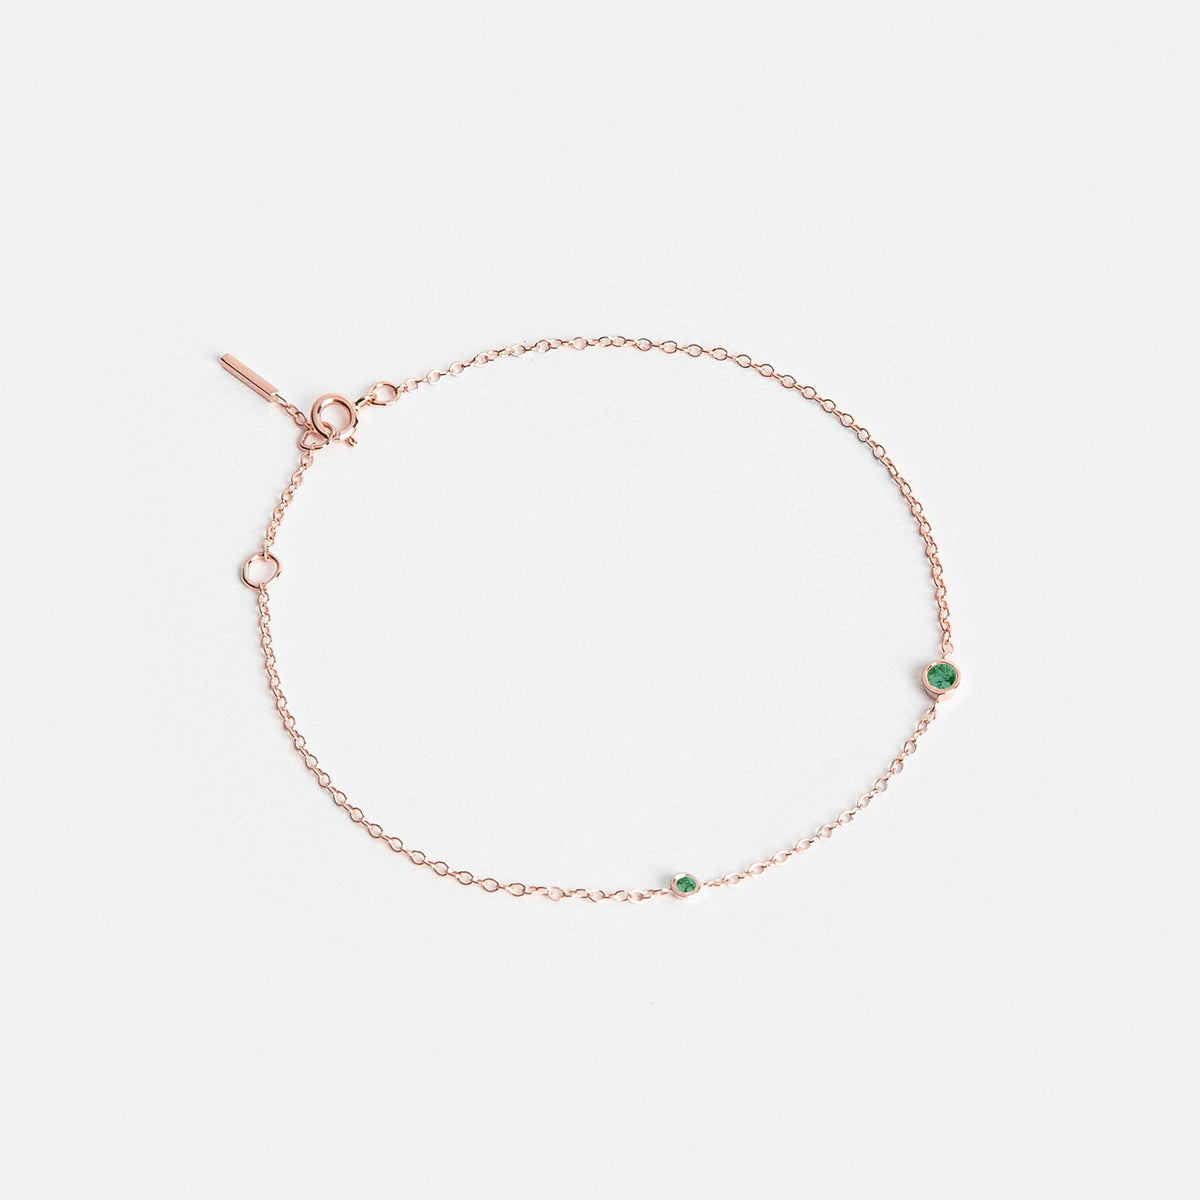 Iba Designer Bracelet in 14k Rose Gold set with Precious stones By SHW Fine Jewelry NYC